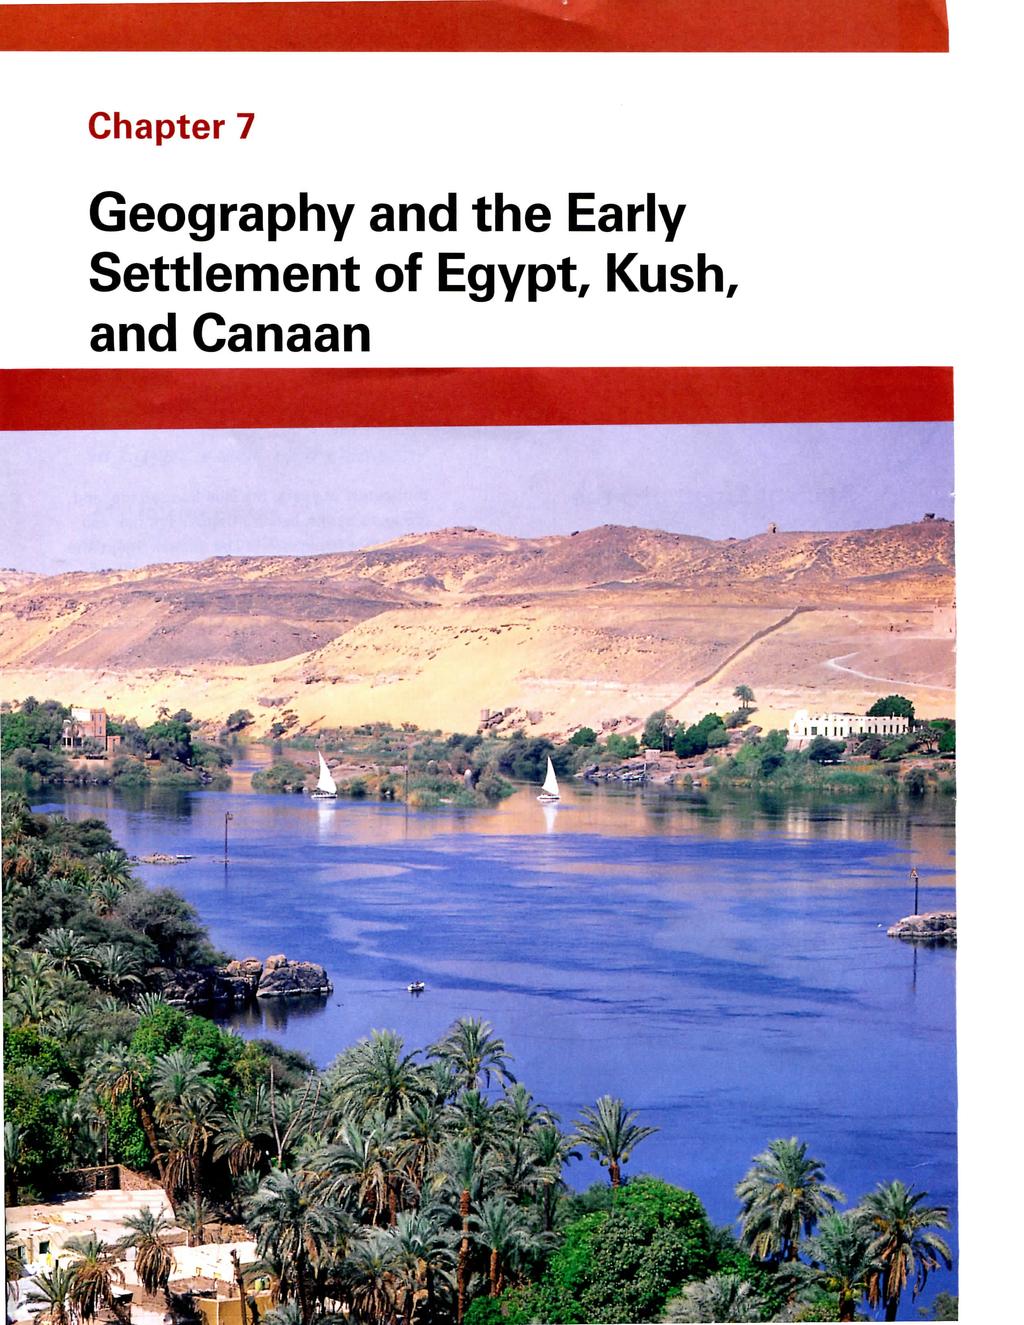 Chapter 7 Geography and the Early